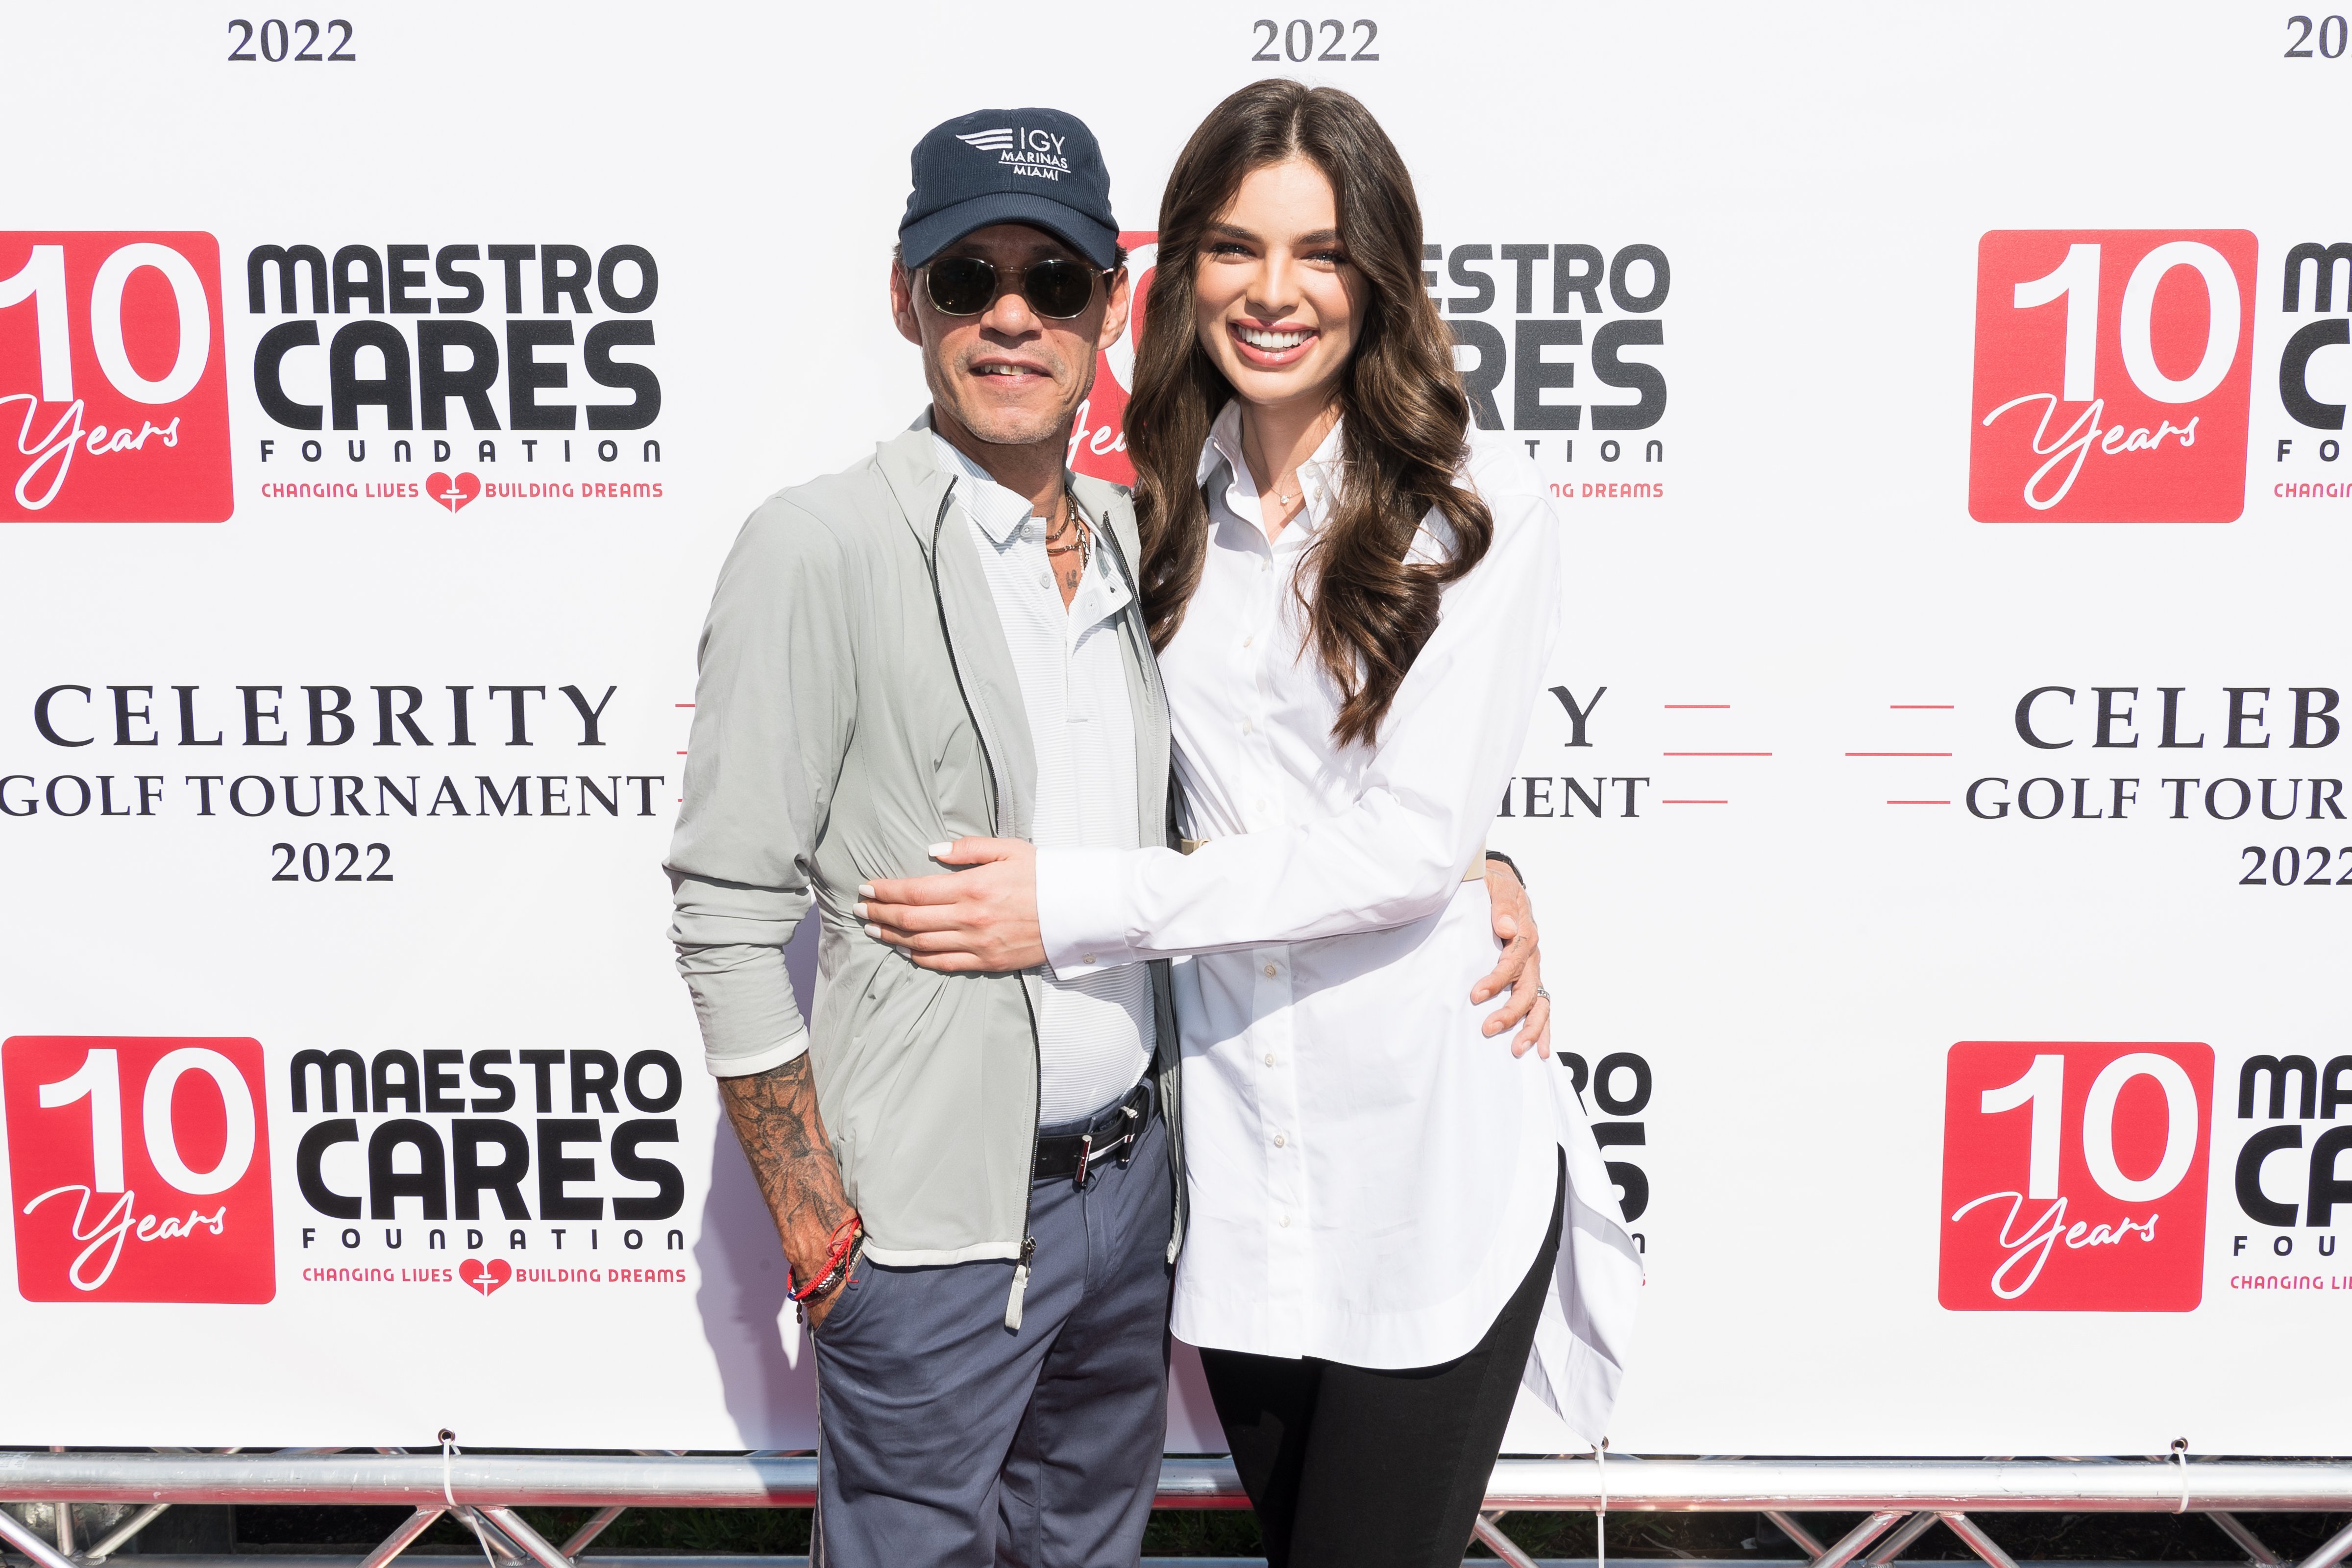 Singer-songwriter Marc Anthony with his fiancee, model Nadia Ferreira during the 2022 Maestro Cares Foundation's Celebrity Golf Tournament at Biltmore Hotel Miami-Coral Gables on April 05, 2022 in Coral Gables, Florida. / Source: Getty Images